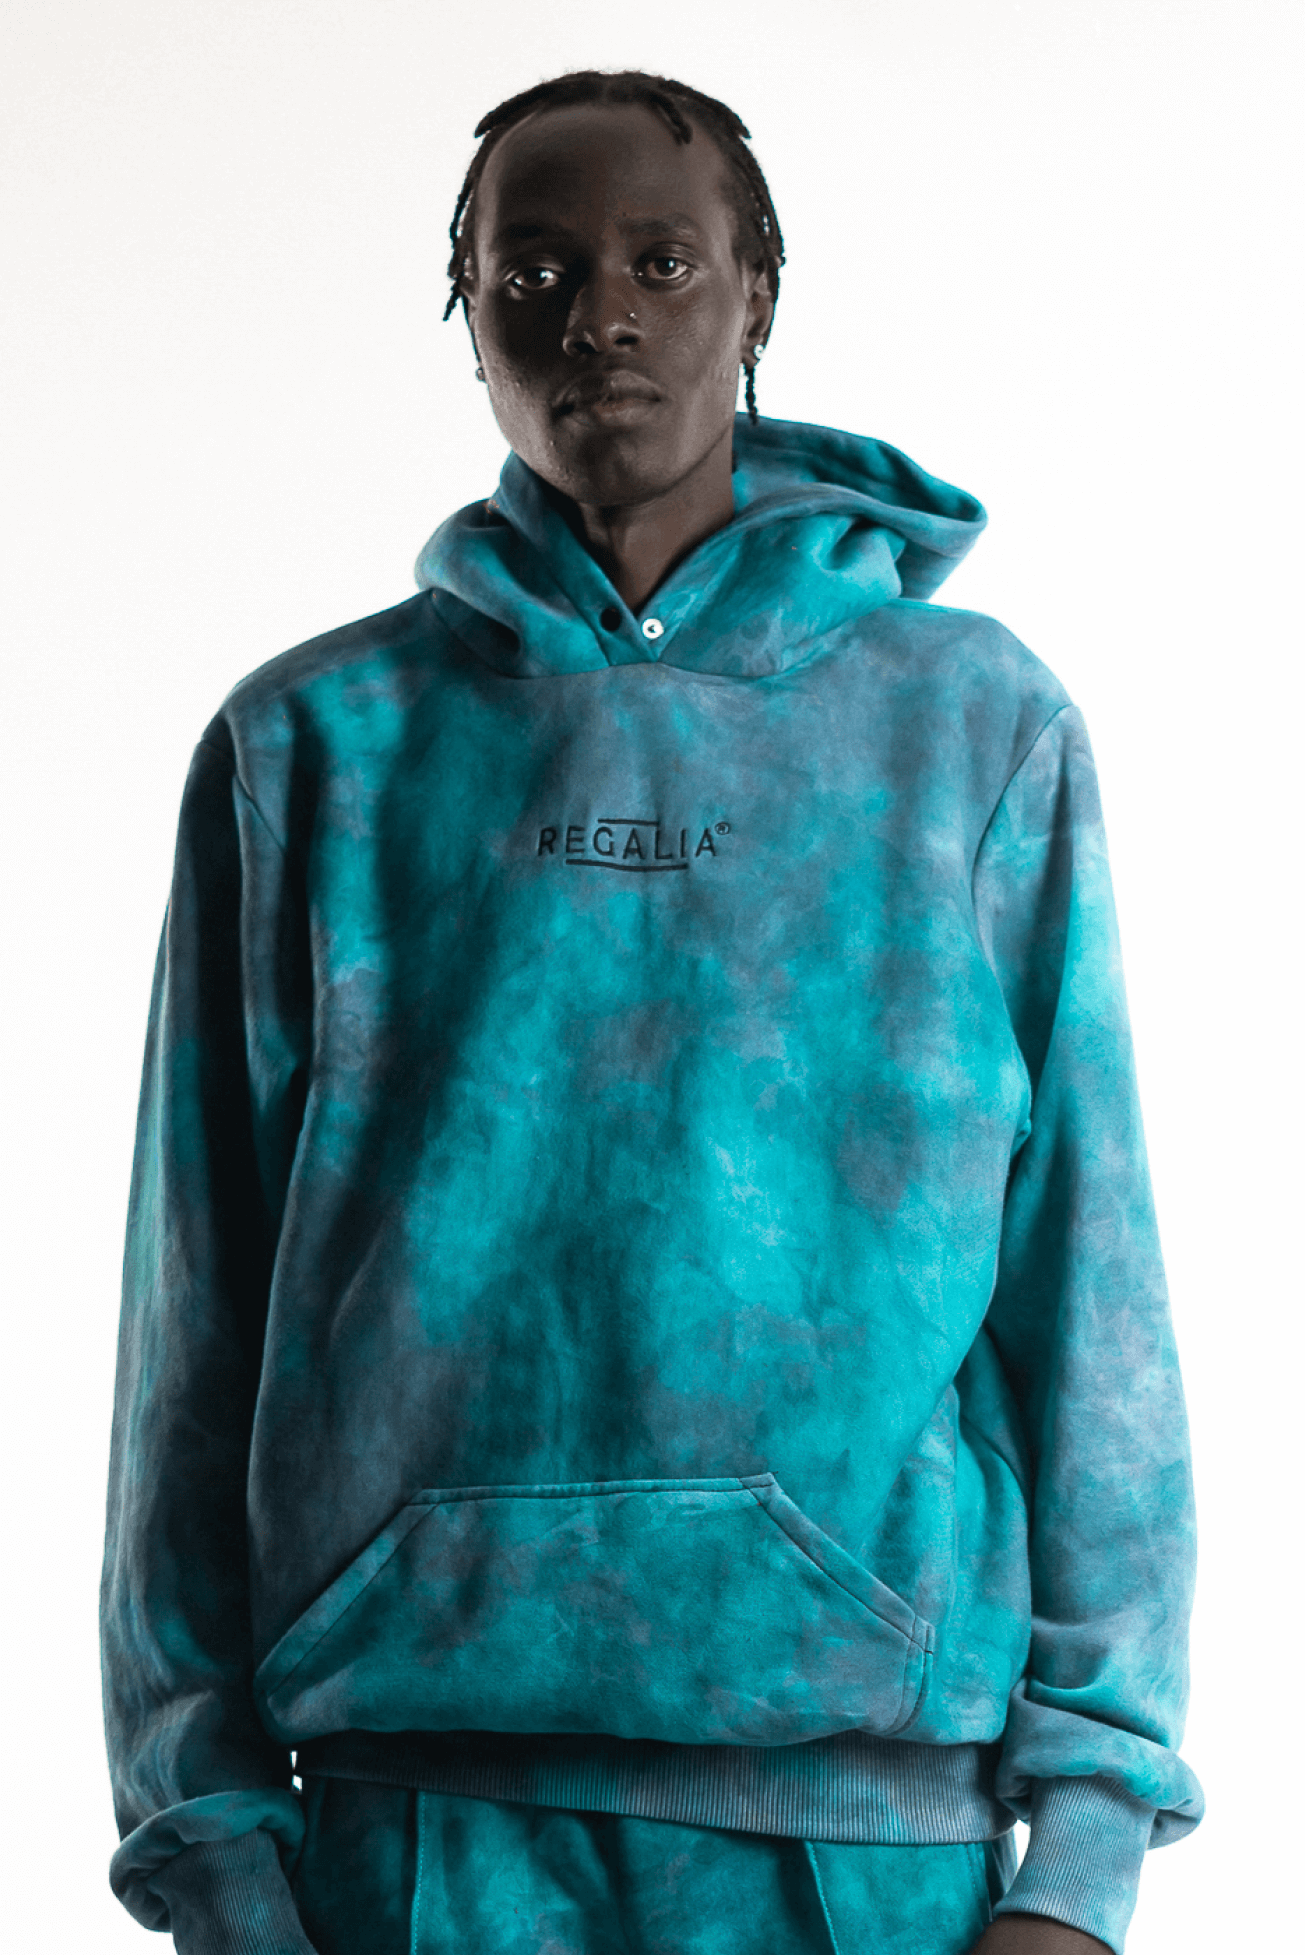 Shop Upeo Hoodie (Green & Black Blend) by Regalia Apparel on Arrai. Discover stylish, affordable clothing, jewelry, handbags and unique handmade pieces from top Kenyan & African fashion brands prioritising sustainability and quality craftsmanship.